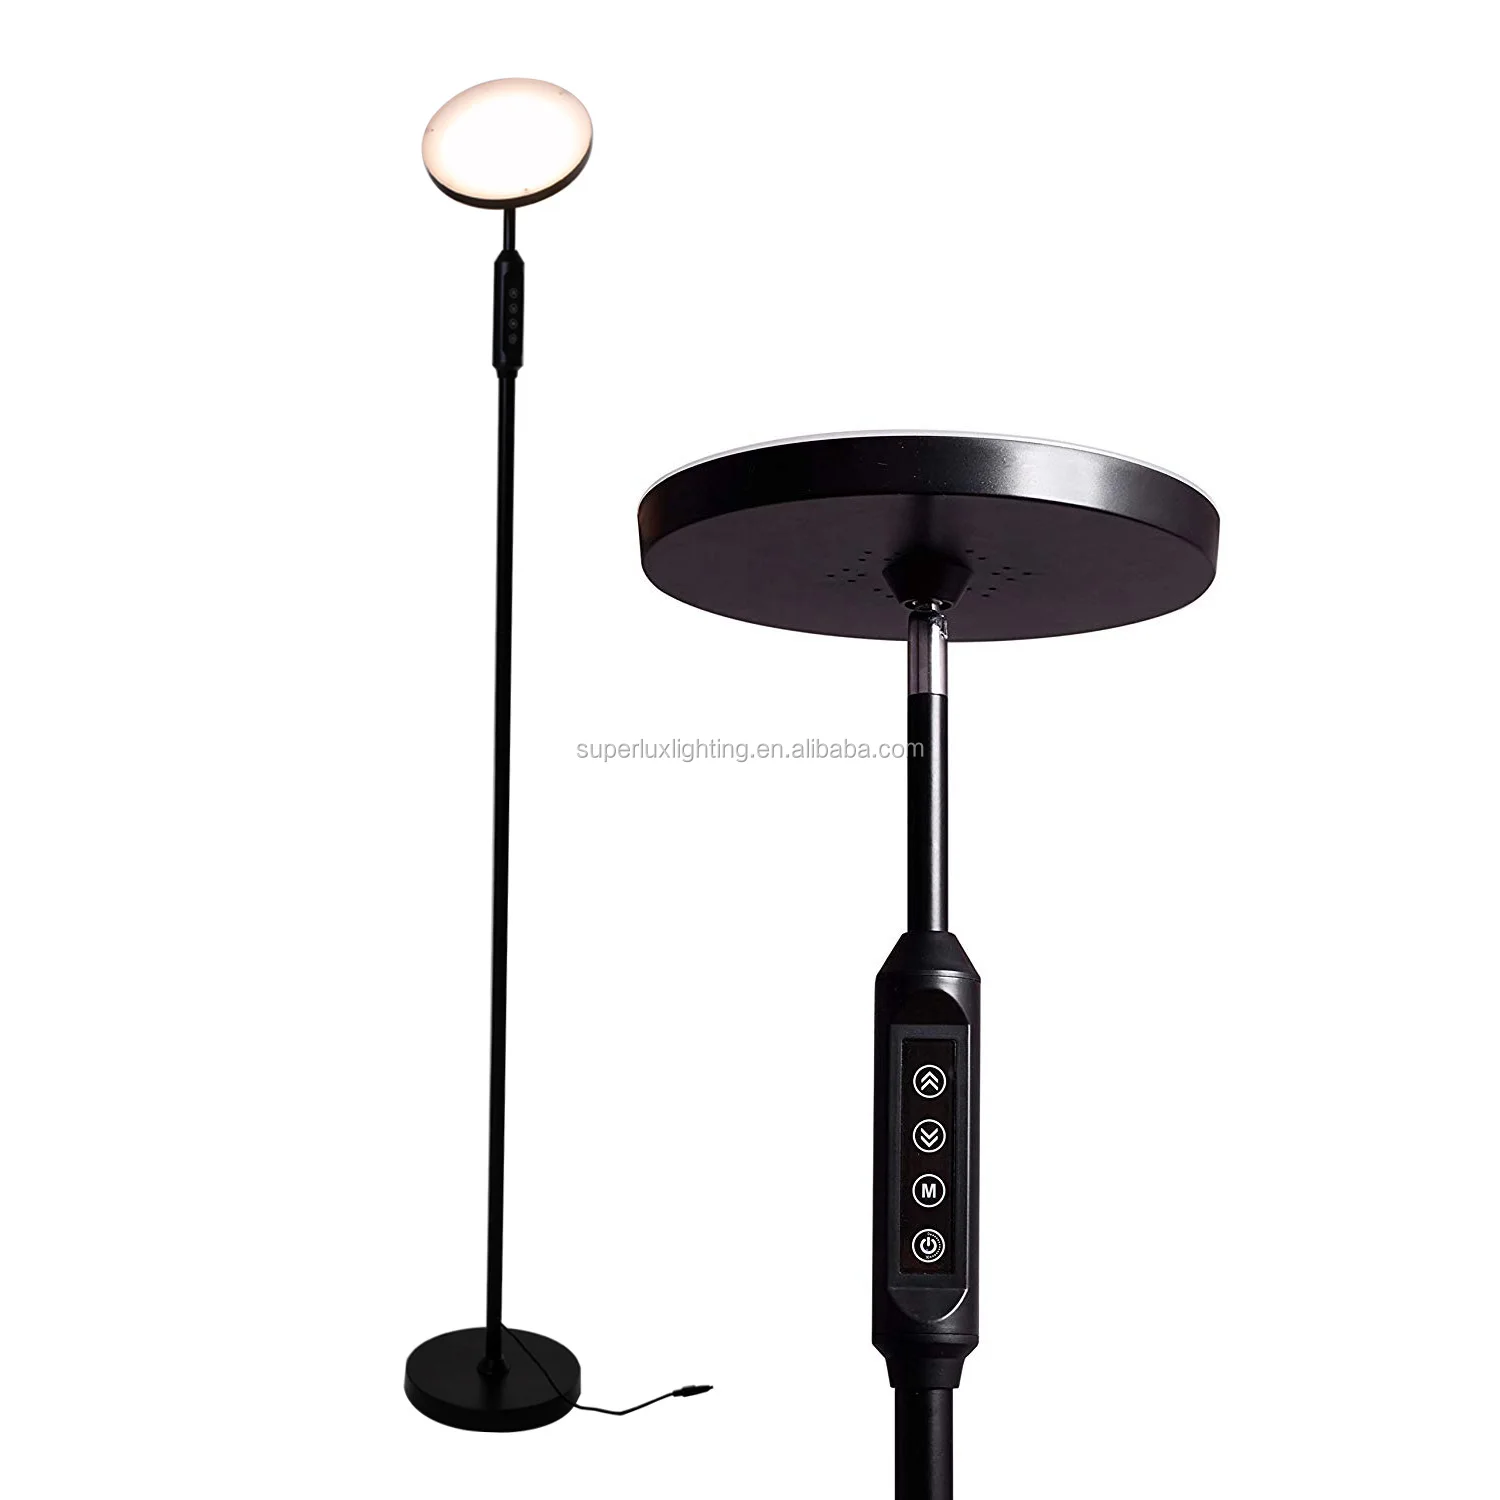 Popular design led reading lamp light indoor office floor stand with touch control